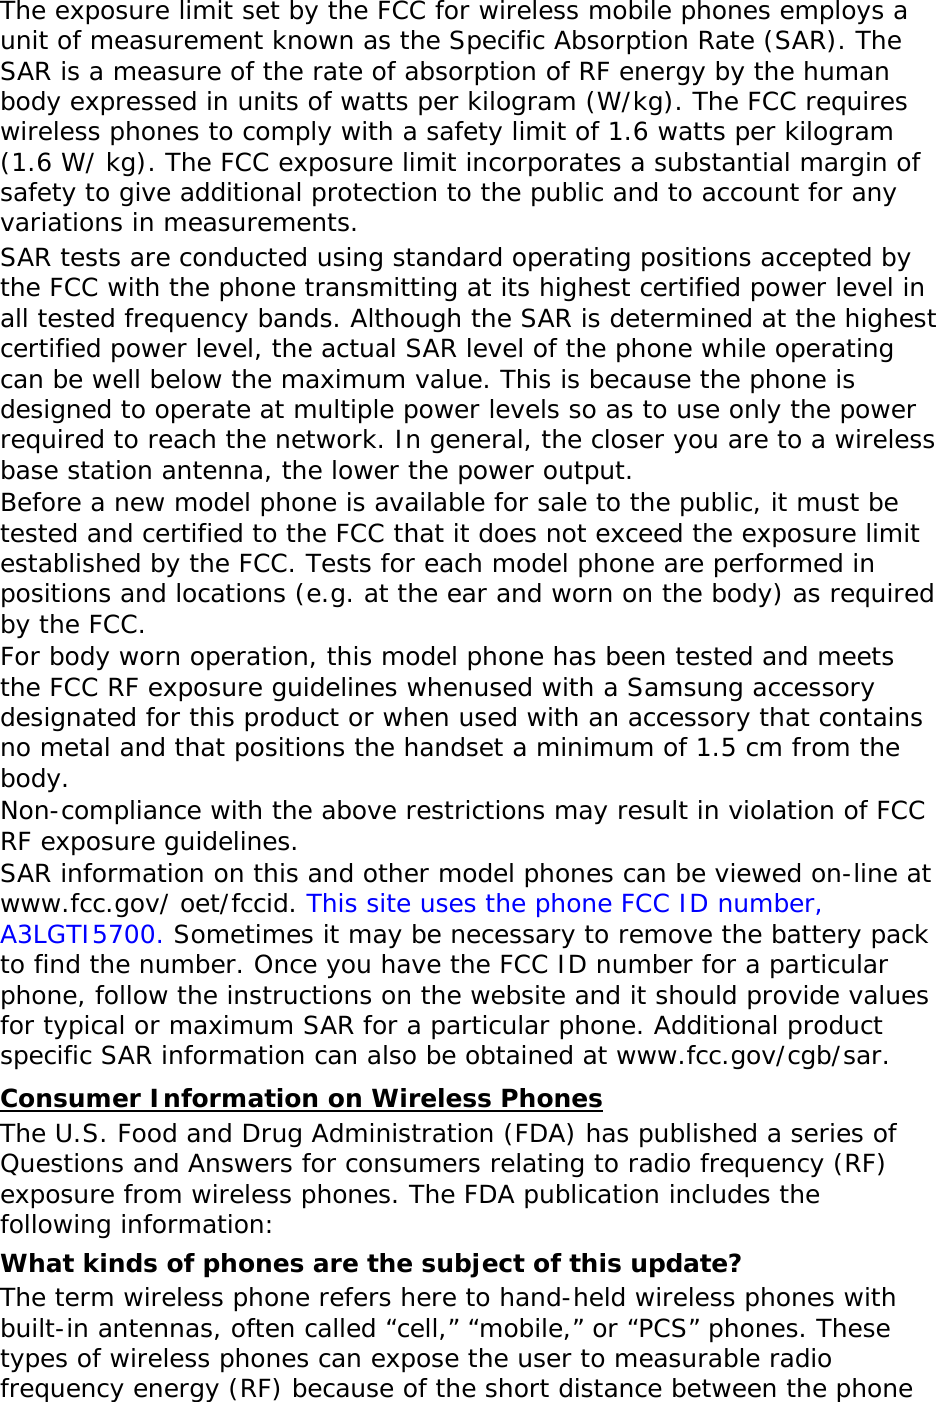   The exposure limit set by the FCC for wireless mobile phones employs a unit of measurement known as the Specific Absorption Rate (SAR). The SAR is a measure of the rate of absorption of RF energy by the human body expressed in units of watts per kilogram (W/kg). The FCC requires wireless phones to comply with a safety limit of 1.6 watts per kilogram (1.6 W/ kg). The FCC exposure limit incorporates a substantial margin of safety to give additional protection to the public and to account for any variations in measurements. SAR tests are conducted using standard operating positions accepted by the FCC with the phone transmitting at its highest certified power level in all tested frequency bands. Although the SAR is determined at the highest certified power level, the actual SAR level of the phone while operating can be well below the maximum value. This is because the phone is designed to operate at multiple power levels so as to use only the power required to reach the network. In general, the closer you are to a wireless base station antenna, the lower the power output. Before a new model phone is available for sale to the public, it must be tested and certified to the FCC that it does not exceed the exposure limit established by the FCC. Tests for each model phone are performed in positions and locations (e.g. at the ear and worn on the body) as required by the FCC.   For body worn operation, this model phone has been tested and meets the FCC RF exposure guidelines whenused with a Samsung accessory designated for this product or when used with an accessory that contains no metal and that positions the handset a minimum of 1.5 cm from the body.  Non-compliance with the above restrictions may result in violation of FCC RF exposure guidelines. SAR information on this and other model phones can be viewed on-line at www.fcc.gov/ oet/fccid. This site uses the phone FCC ID number, A3LGTI5700. Sometimes it may be necessary to remove the battery pack to find the number. Once you have the FCC ID number for a particular phone, follow the instructions on the website and it should provide values for typical or maximum SAR for a particular phone. Additional product specific SAR information can also be obtained at www.fcc.gov/cgb/sar. Consumer Information on Wireless Phones The U.S. Food and Drug Administration (FDA) has published a series of Questions and Answers for consumers relating to radio frequency (RF) exposure from wireless phones. The FDA publication includes the following information: What kinds of phones are the subject of this update? The term wireless phone refers here to hand-held wireless phones with built-in antennas, often called “cell,” “mobile,” or “PCS” phones. These types of wireless phones can expose the user to measurable radio frequency energy (RF) because of the short distance between the phone 